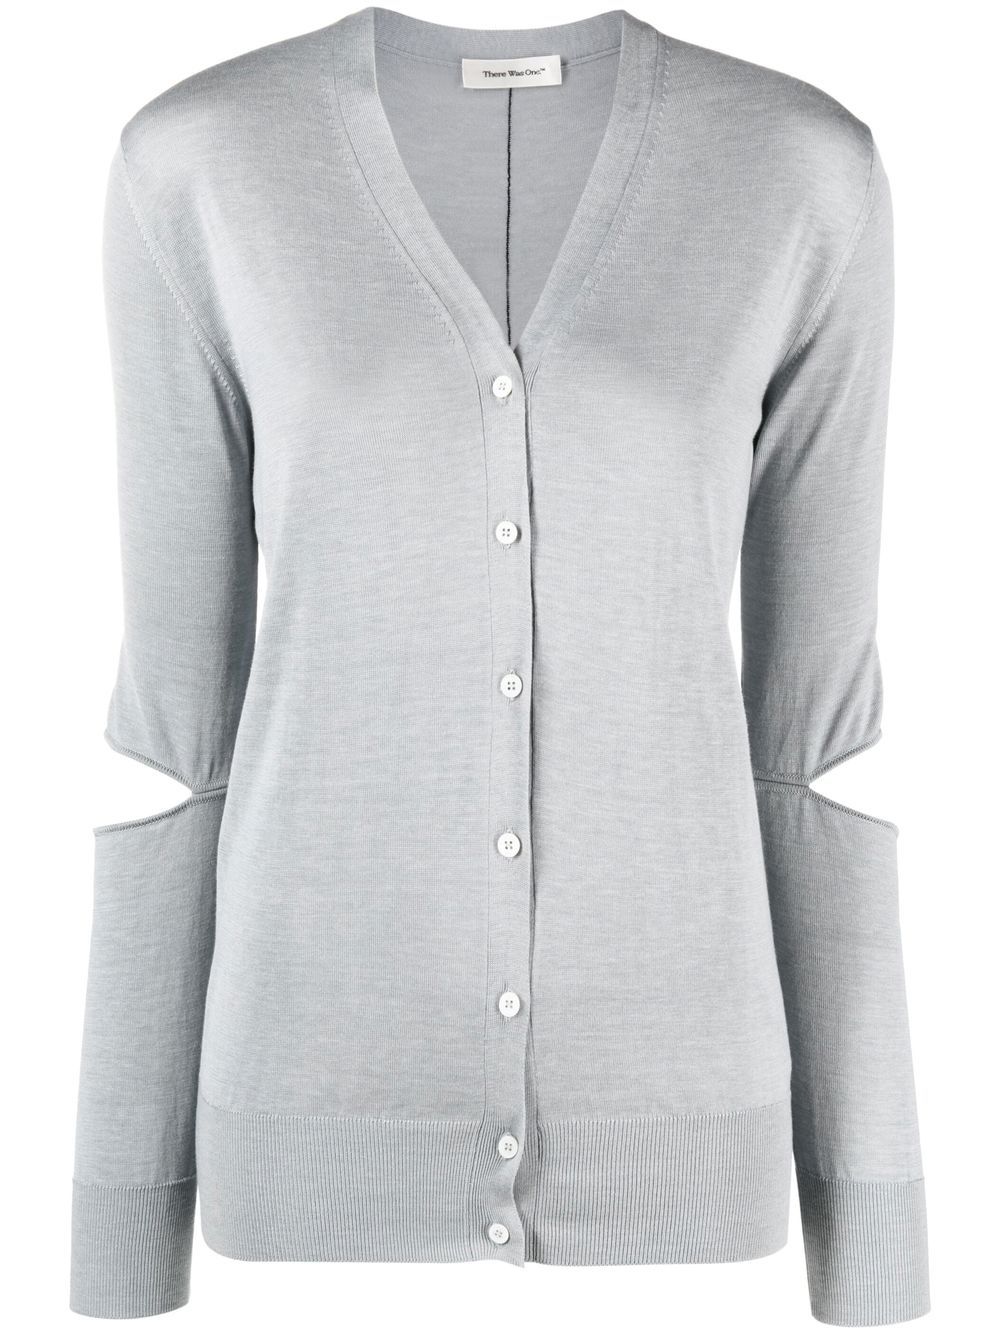 There Was One cut-out V-neck cardigan - Grey von There Was One